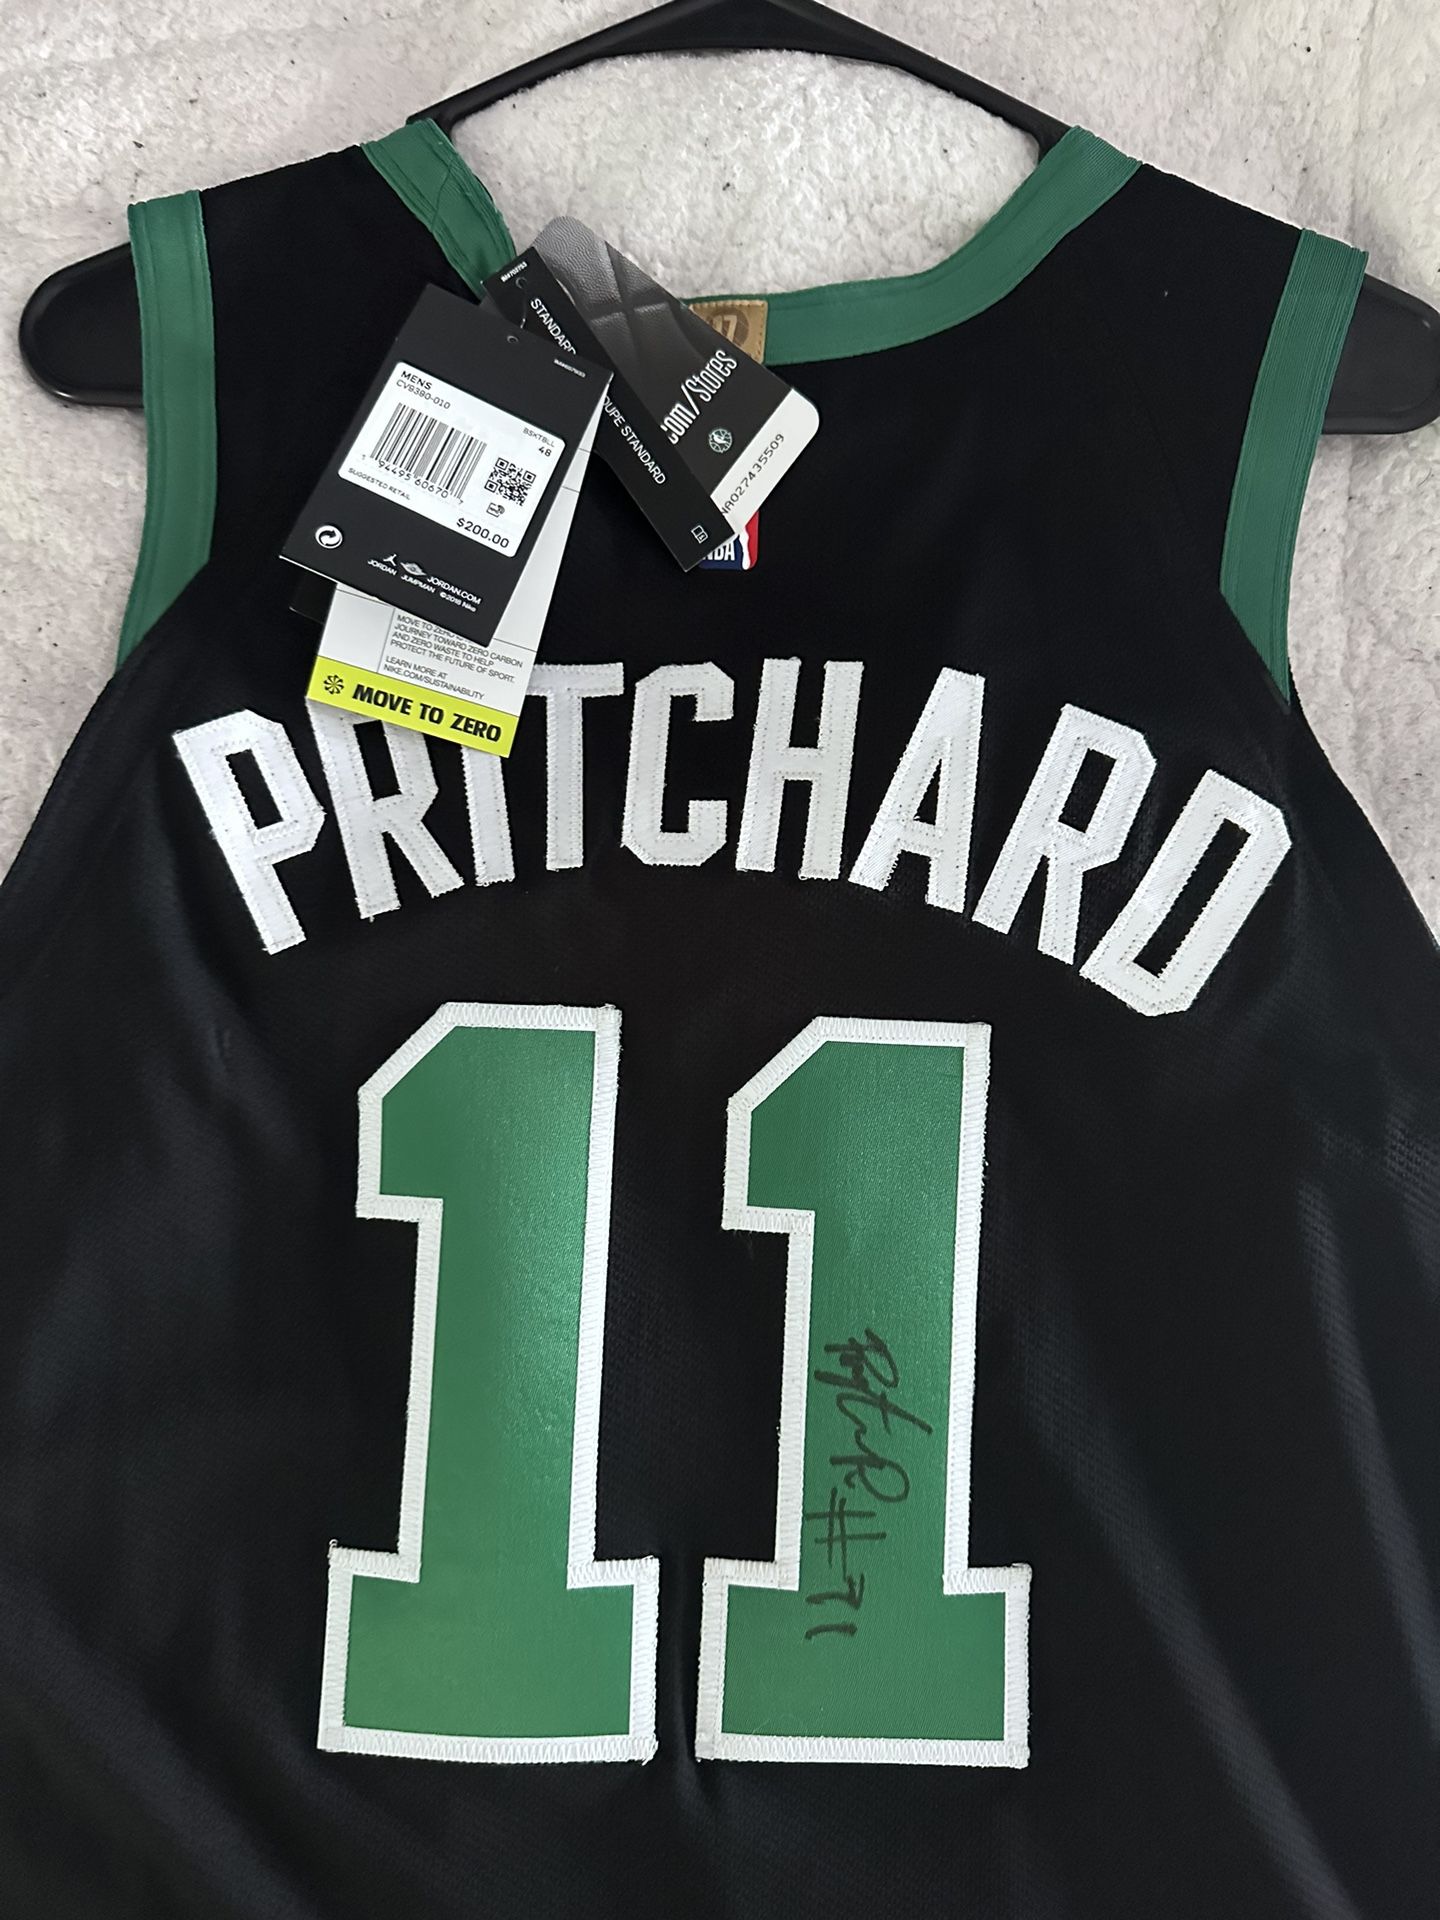 Autographed Kevin Pritchard Jersey